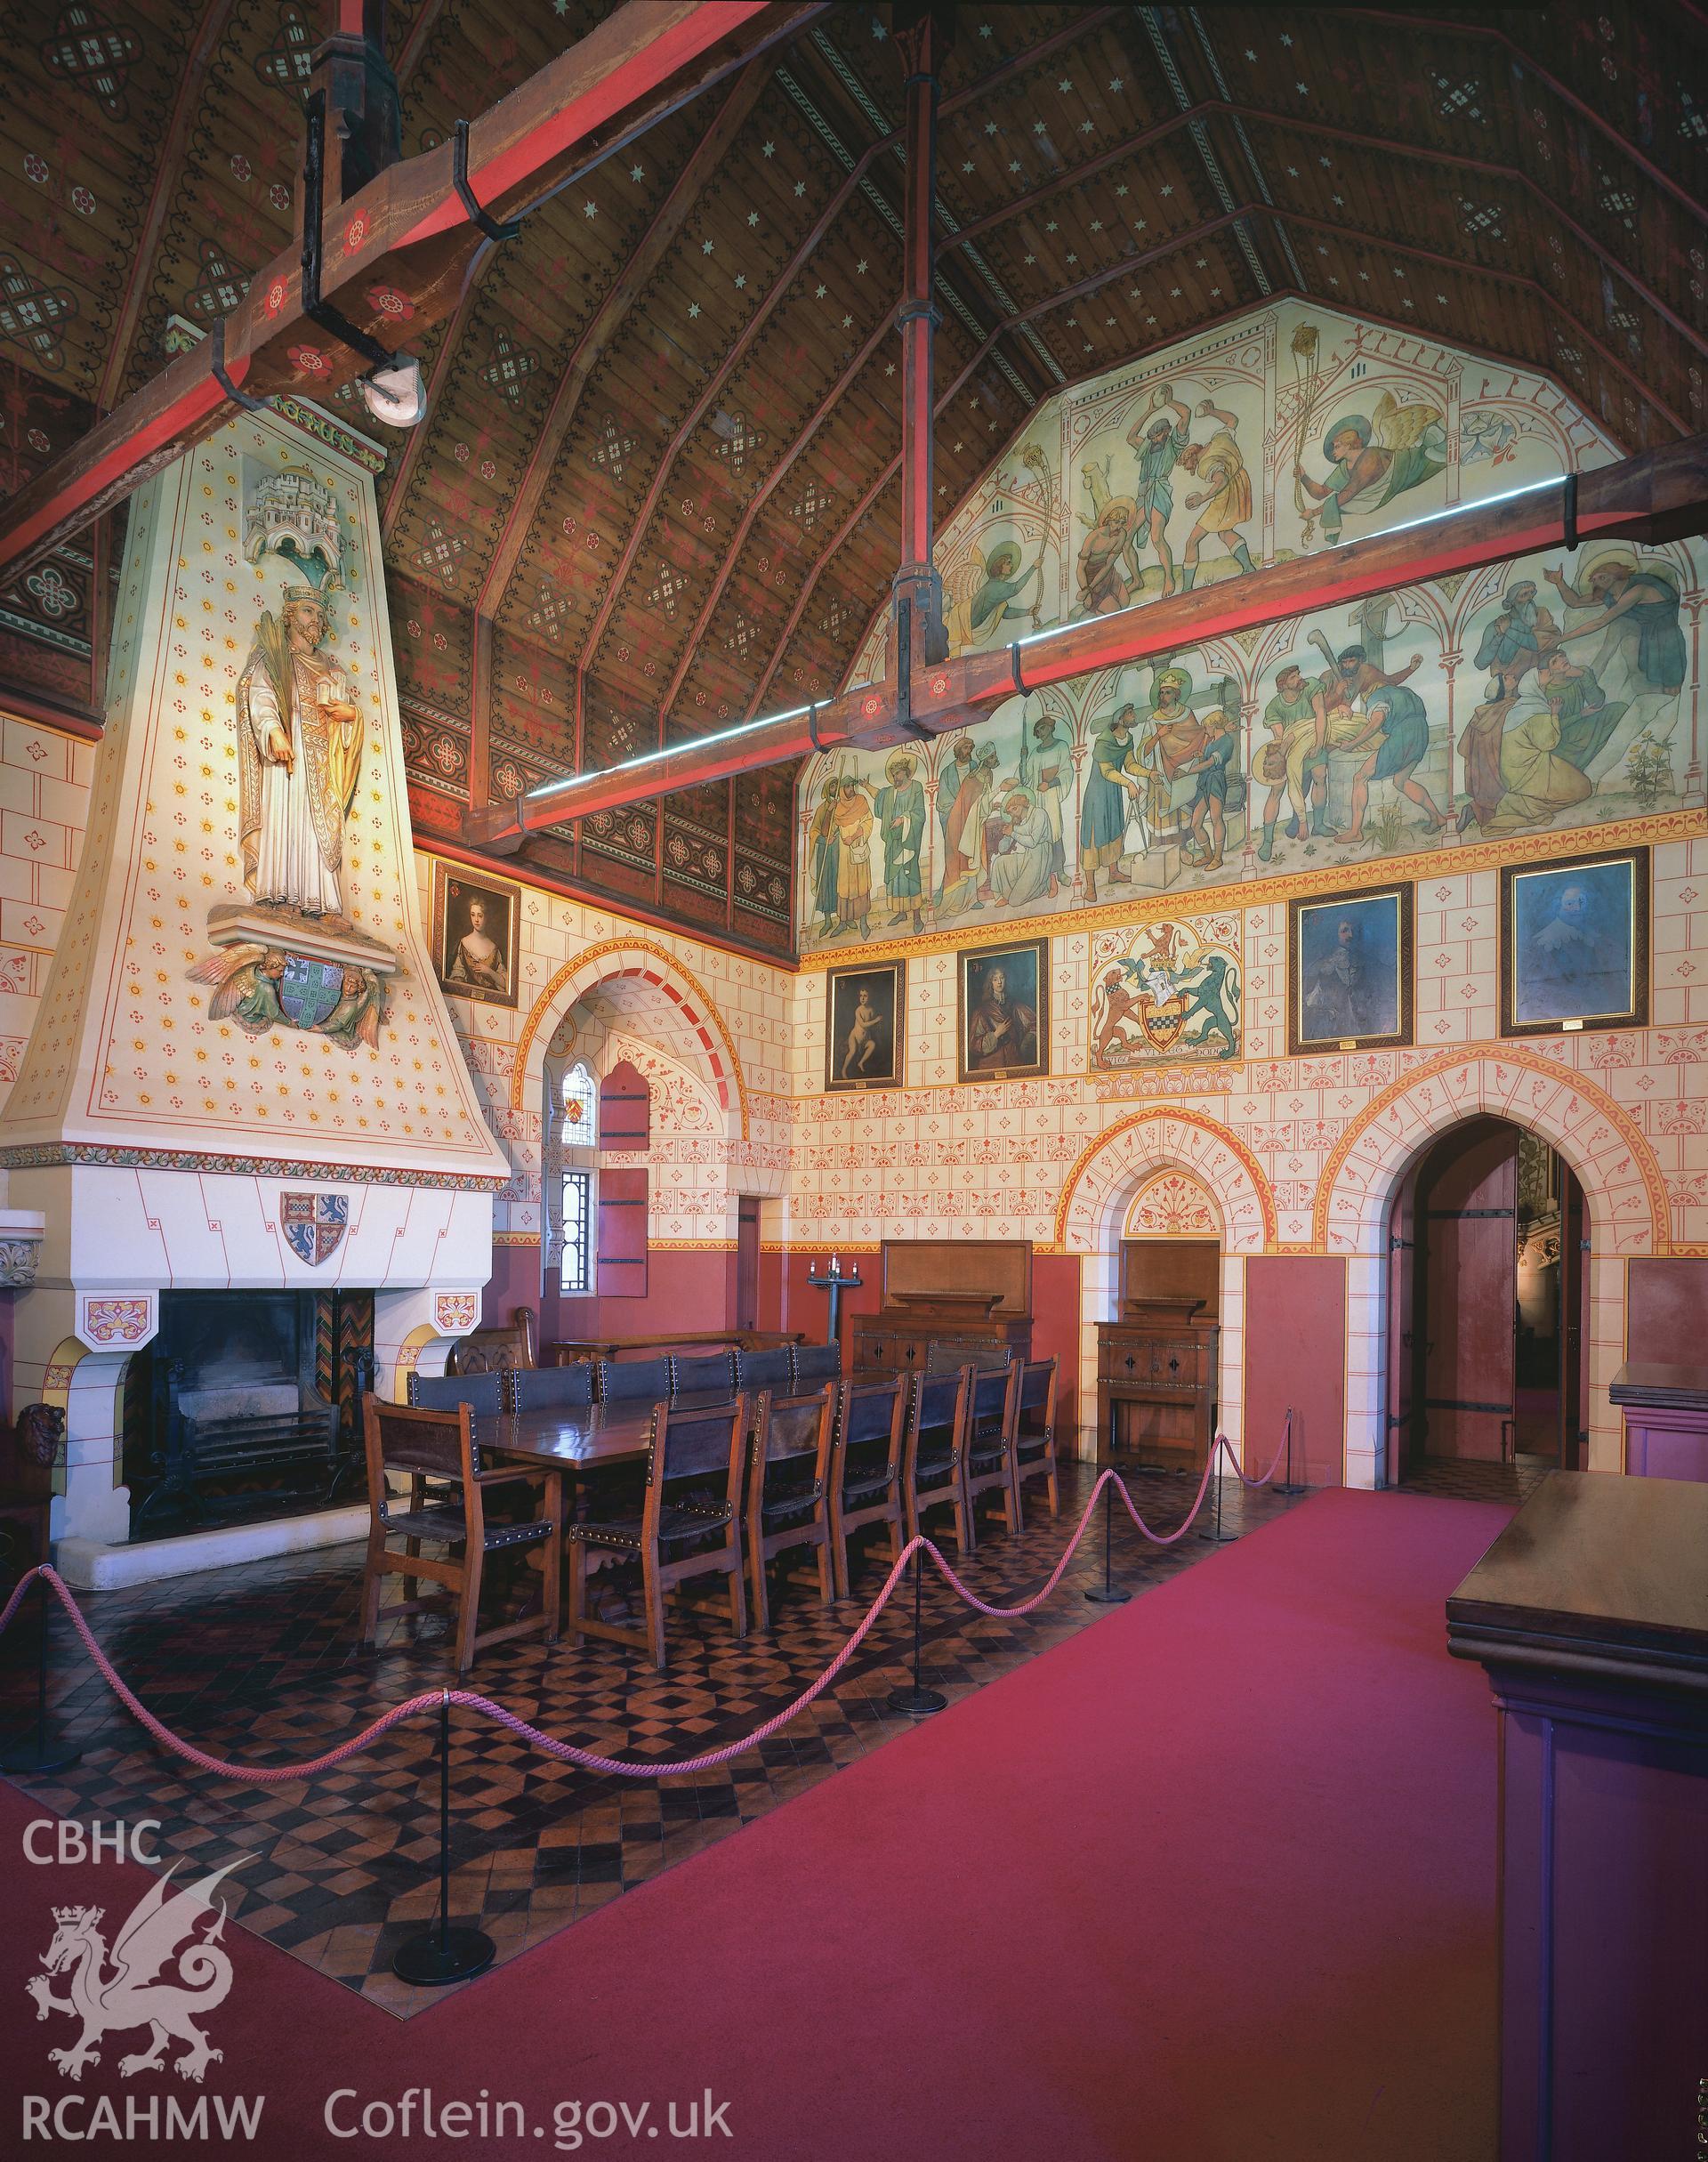 RCAHMW colour transparency of an interior view showing the banqueting hall at Castell Coch.